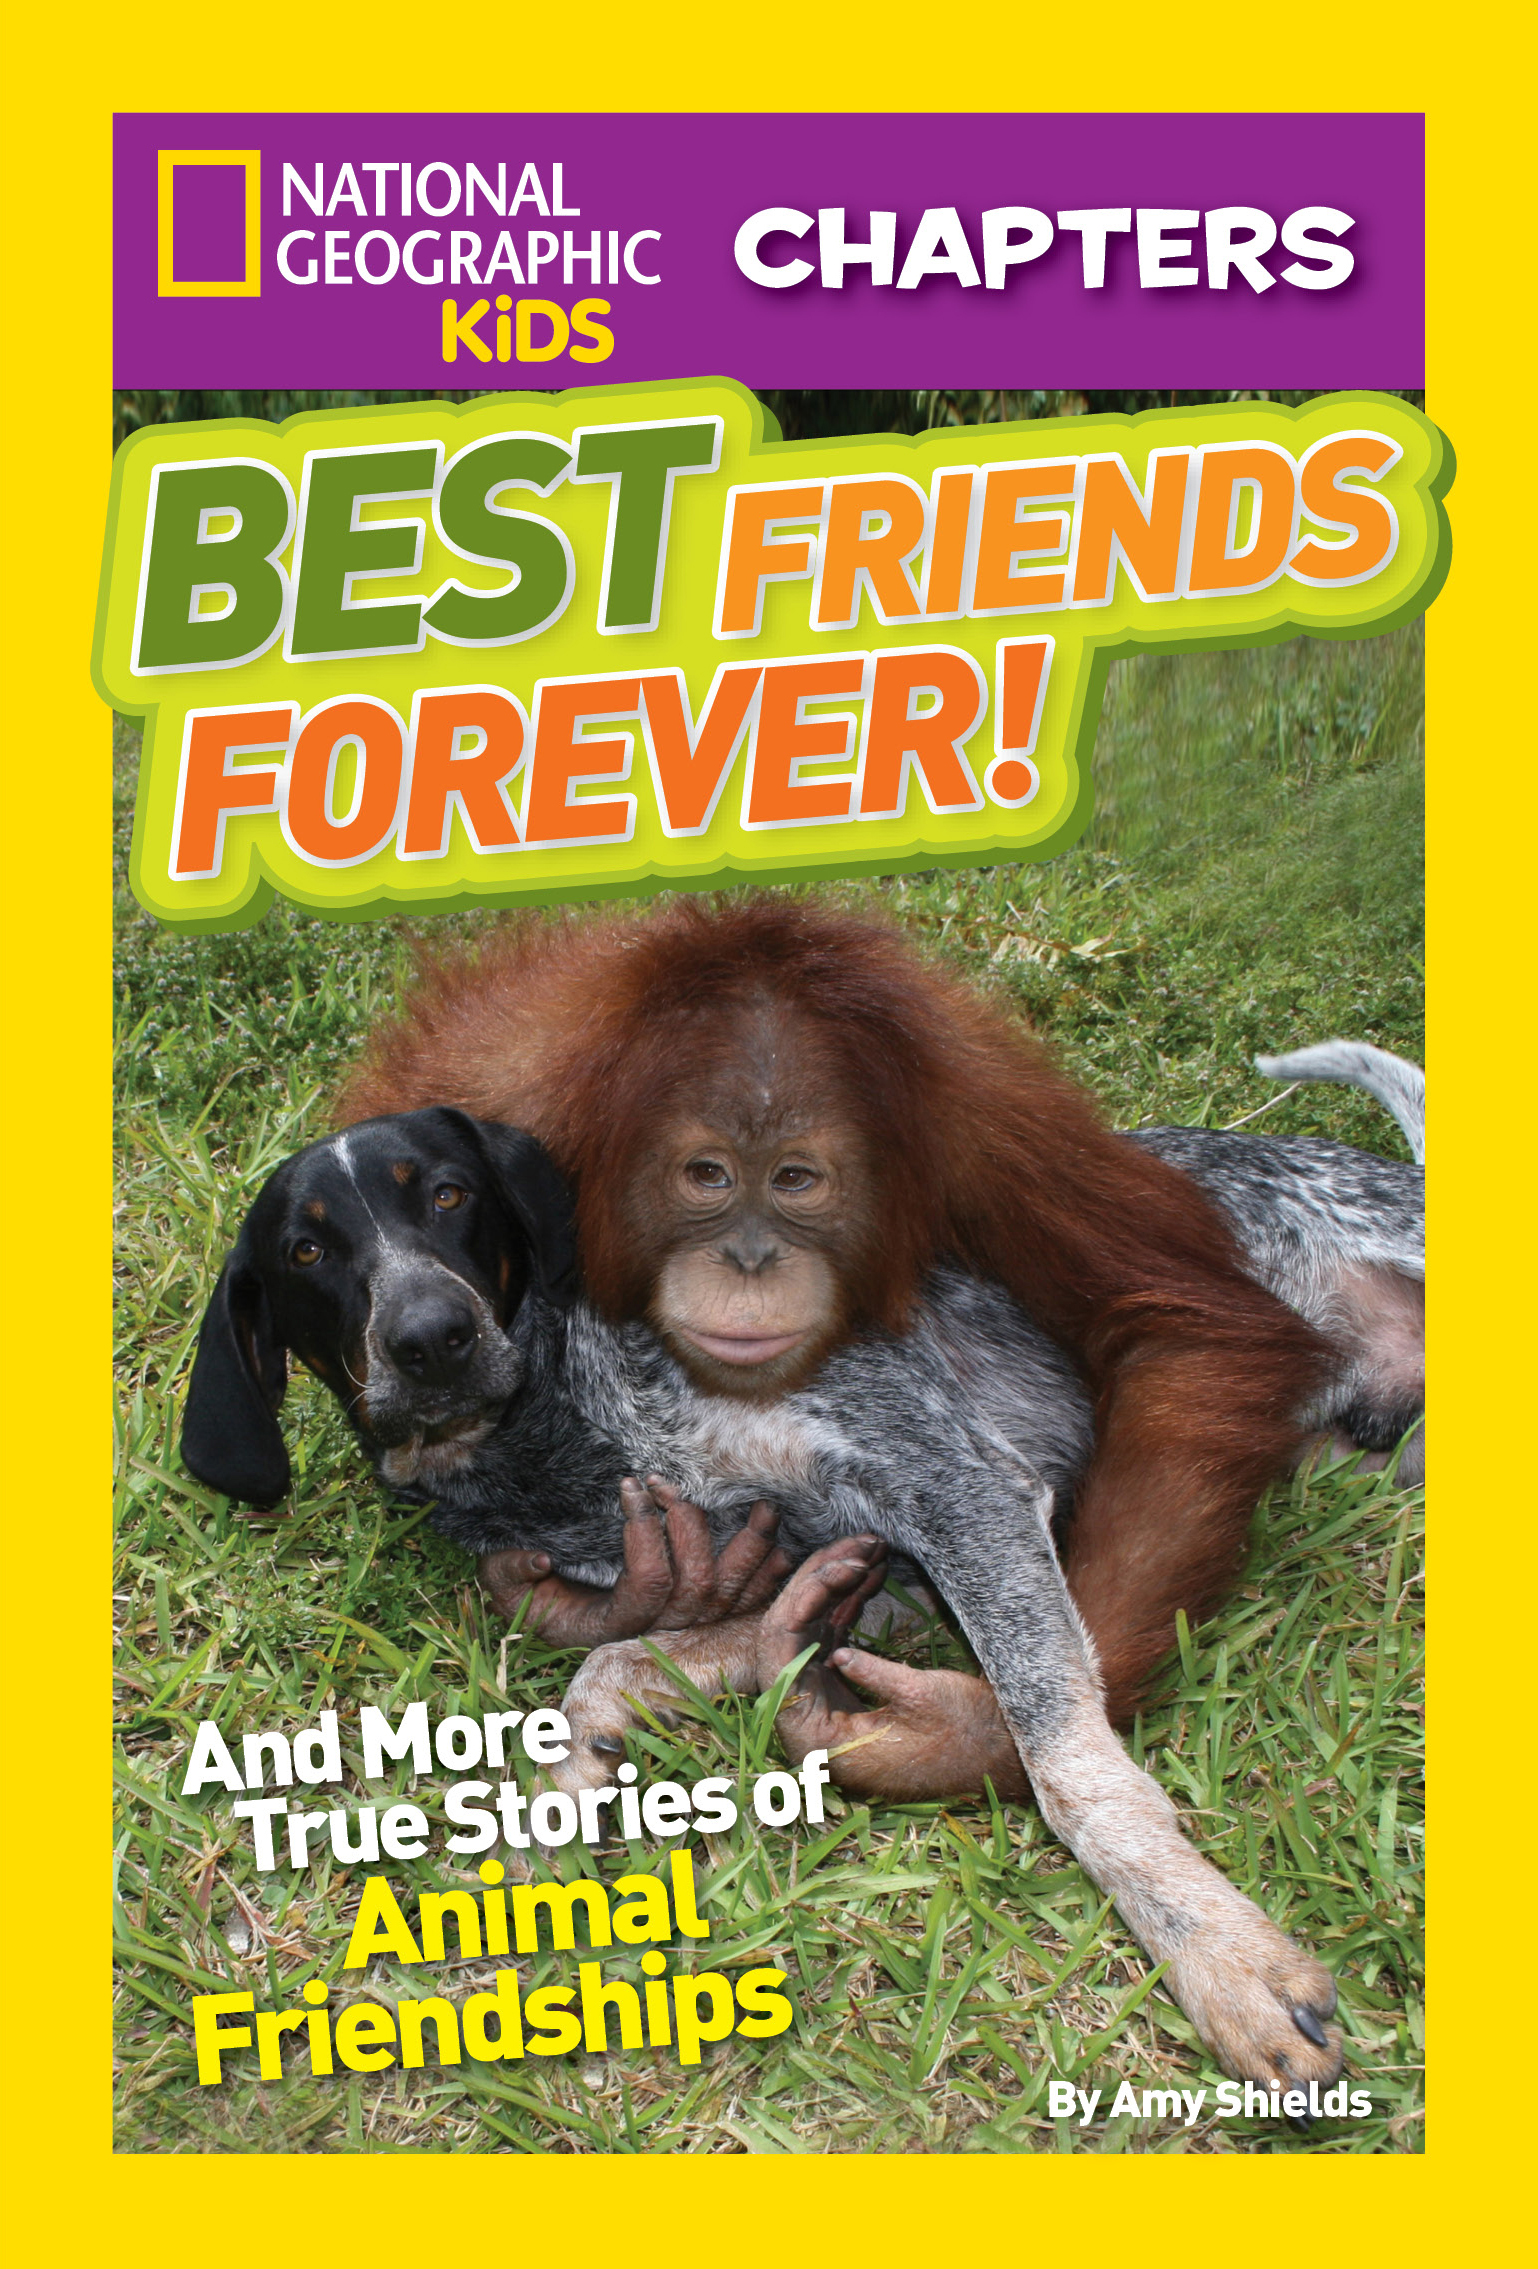 National Geographic kids chapters: best friends forever and more true stories of animal friendships cover image